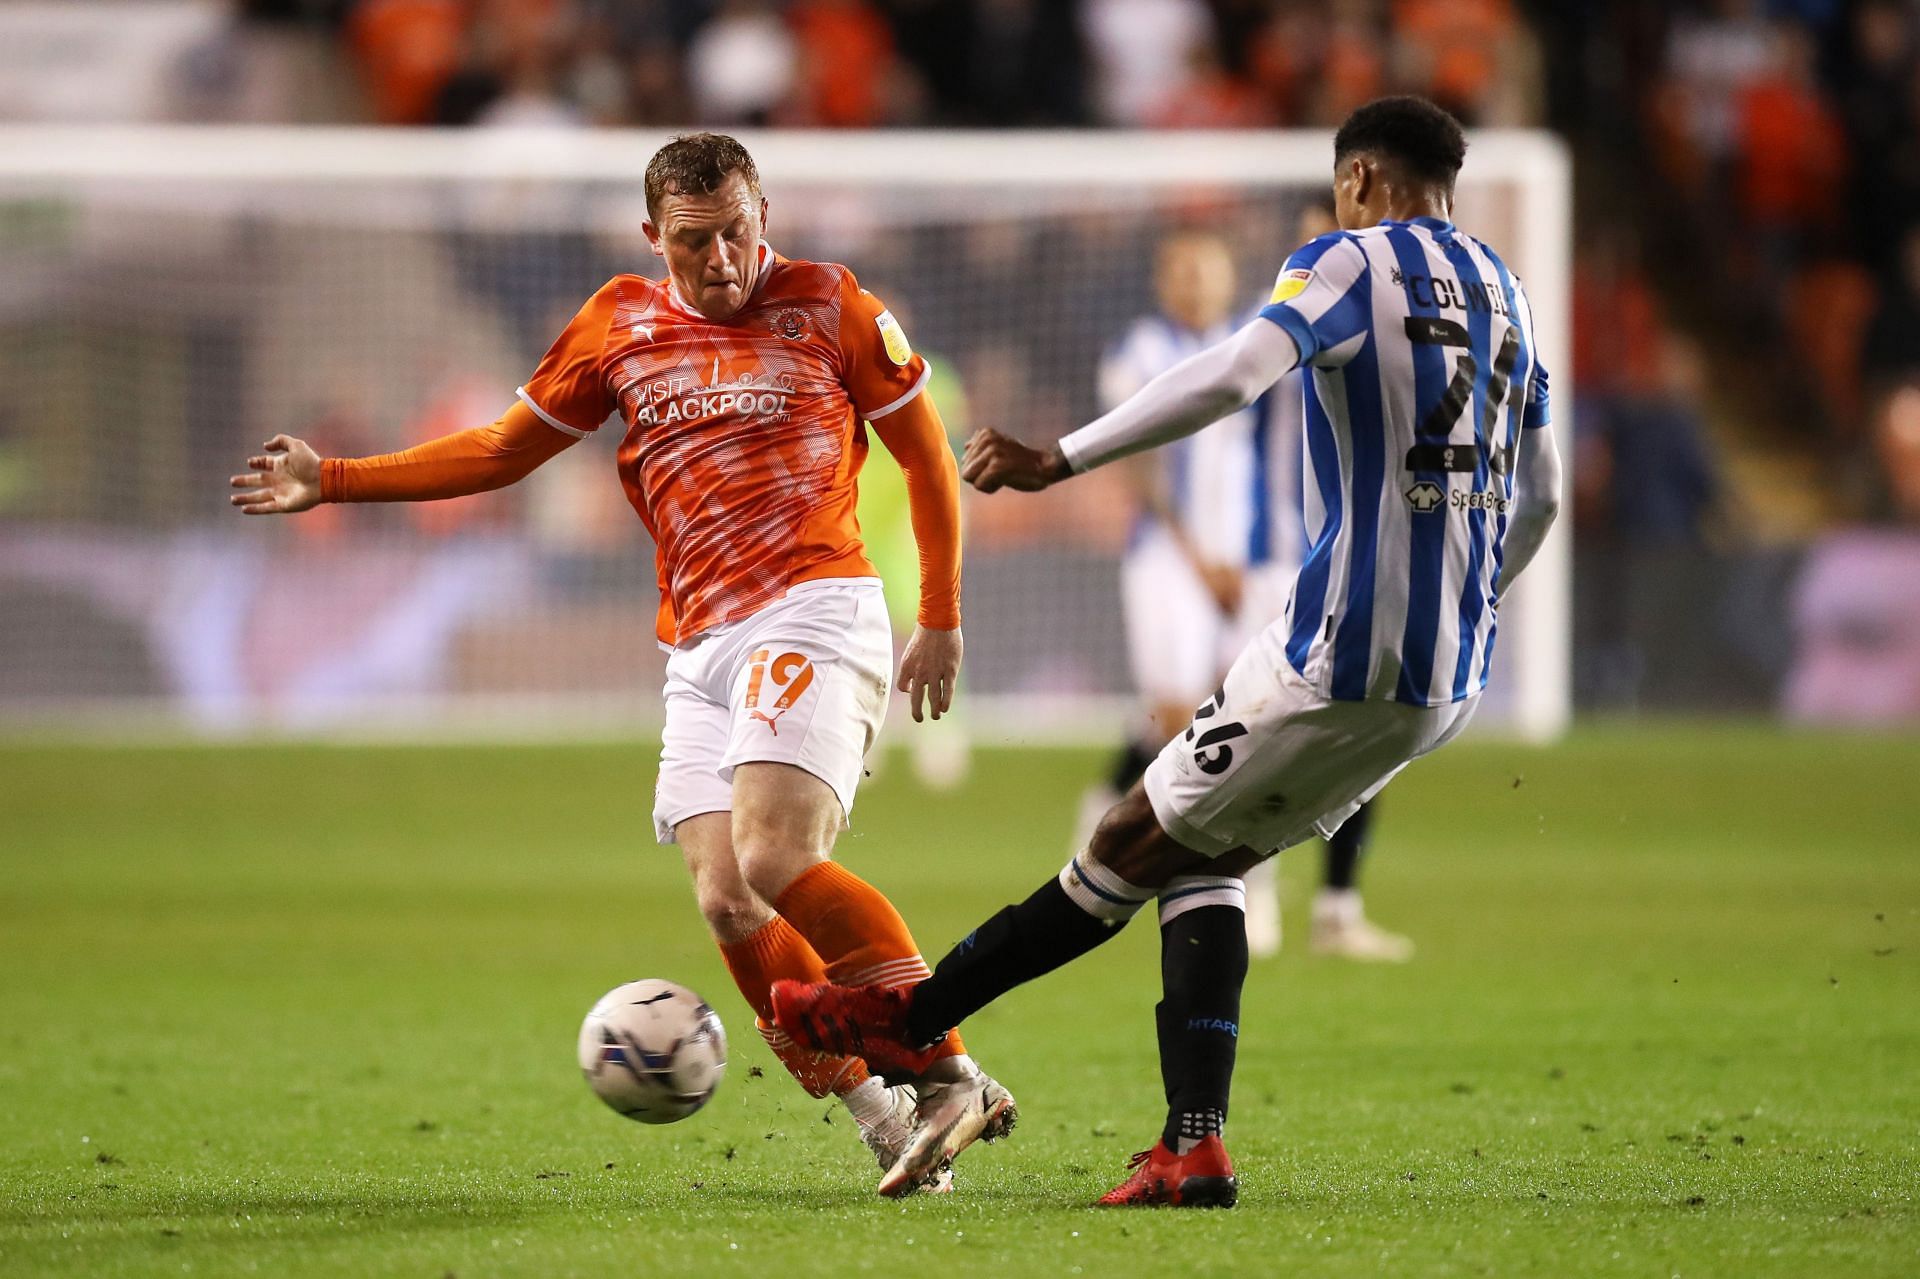 Lavery will be a huge miss for Blackpool